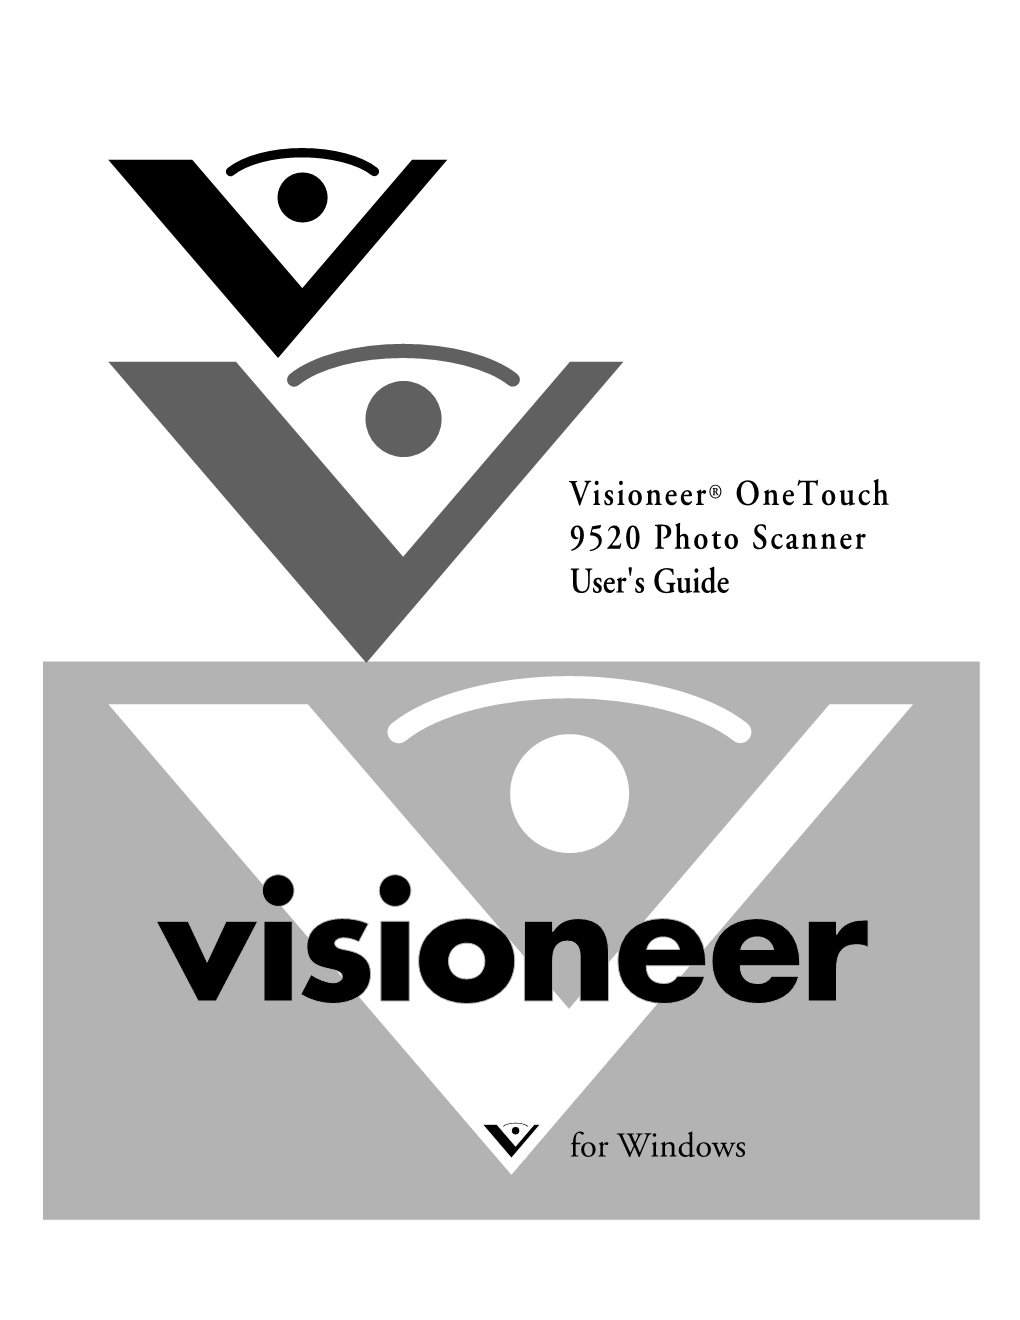 Visioneer® Onetouch 9520 Photo Scanner User's Guide